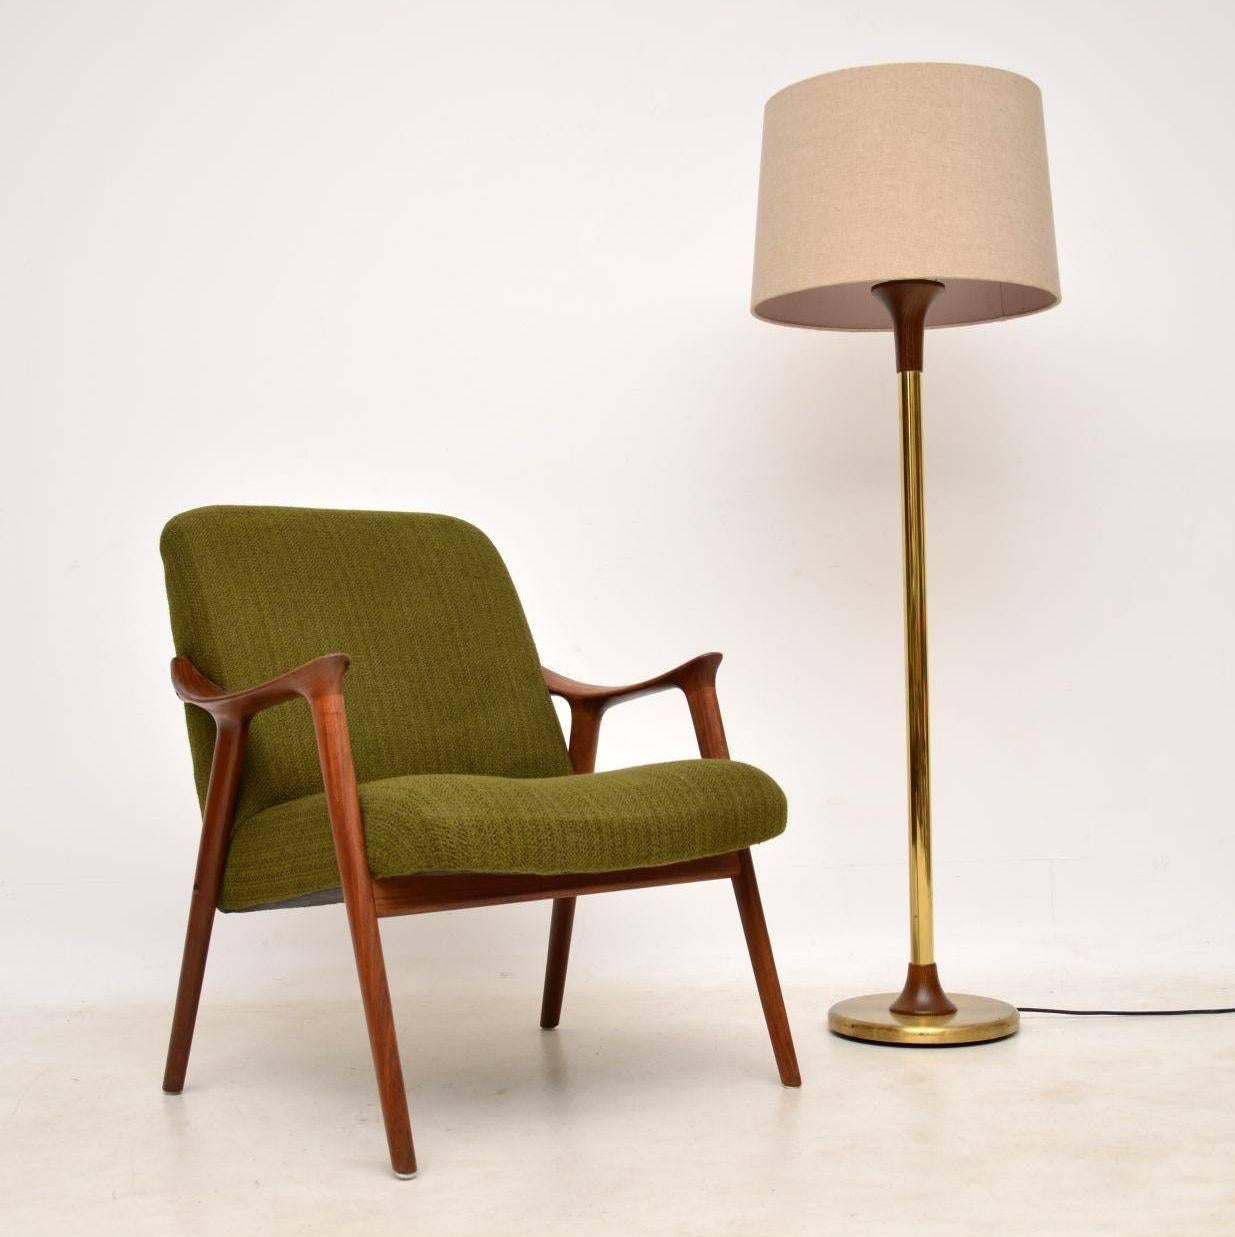 A stunning vintage armchair in solid afromosia wood, this was designed by Ingmar Relling, it was made in Norway by Westnofa in the 1960s. The condition is superb throughout, we have had this newly upholstered in a lovely dark green tweed wool